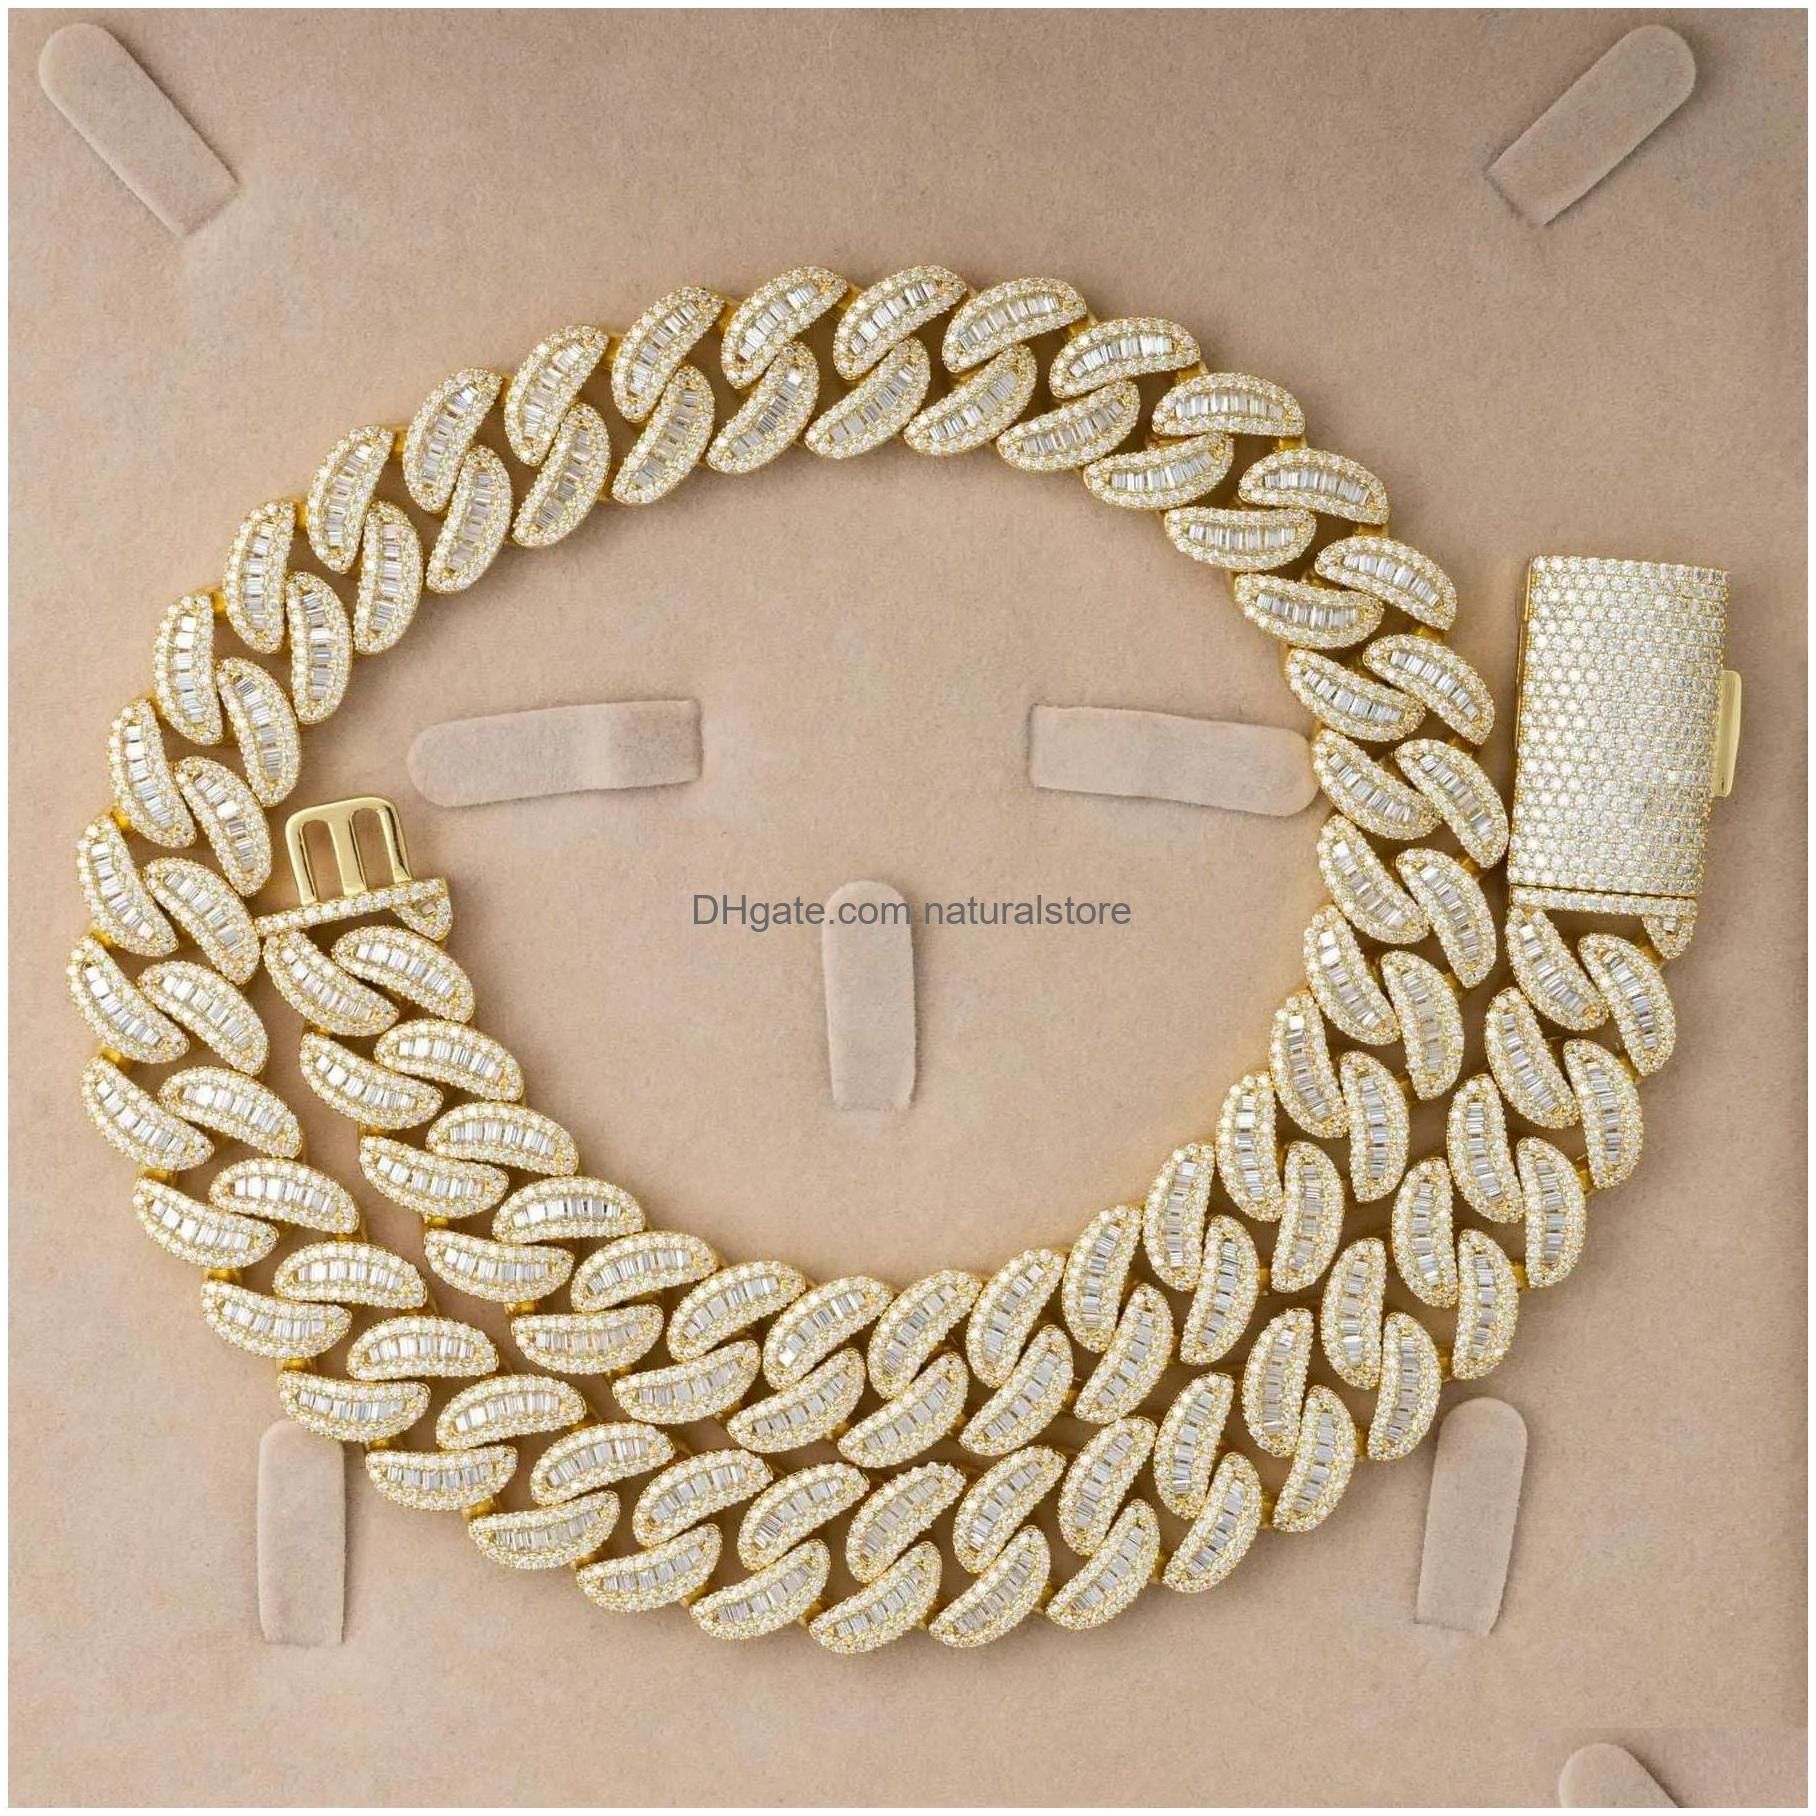 Goud-18 mm 22 inch-necklace